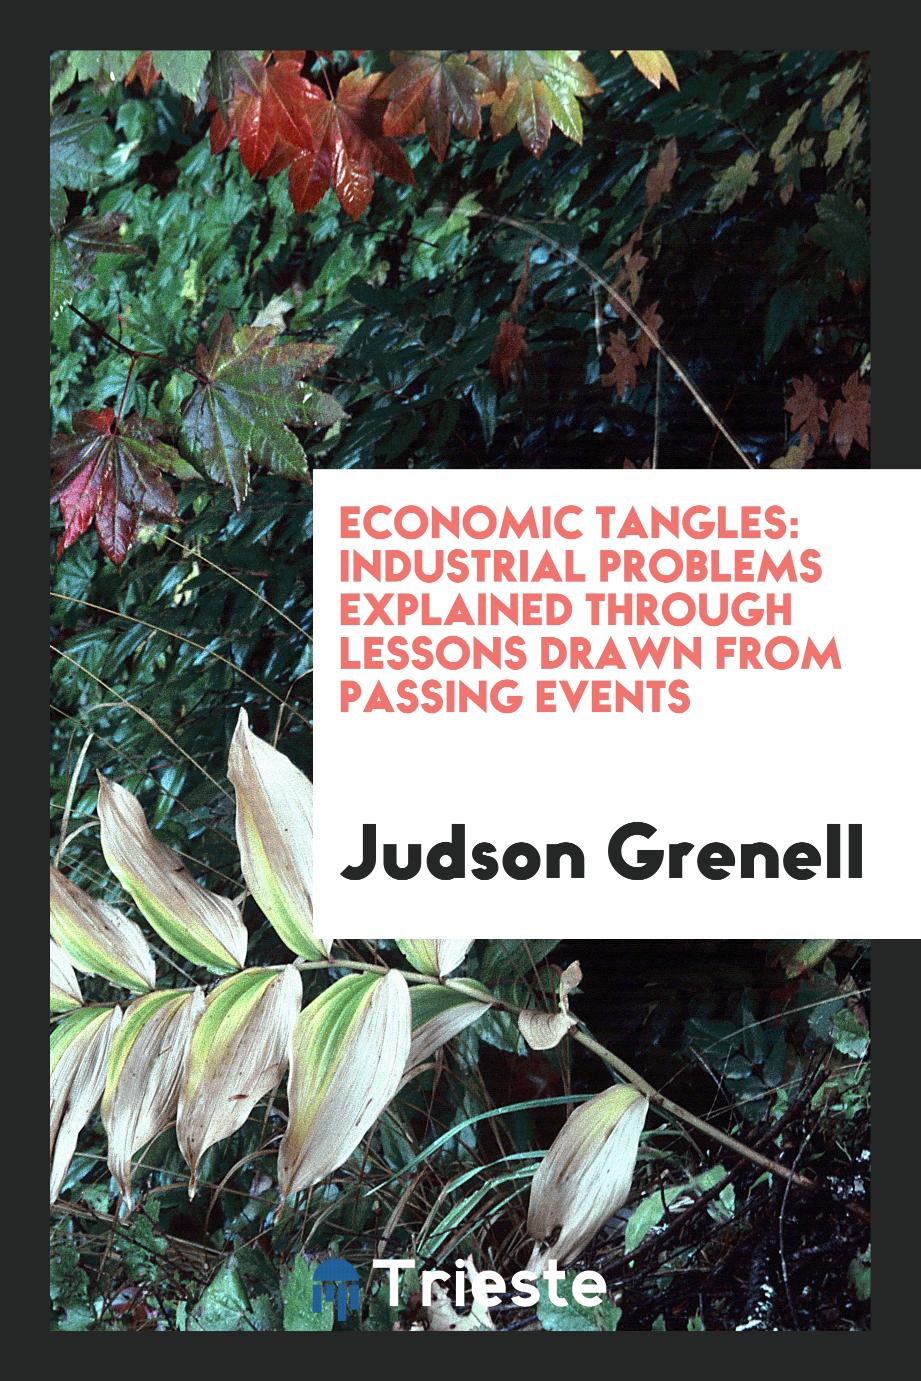 Judson Grenell - Economic Tangles: Industrial Problems Explained through Lessons Drawn from Passing Events